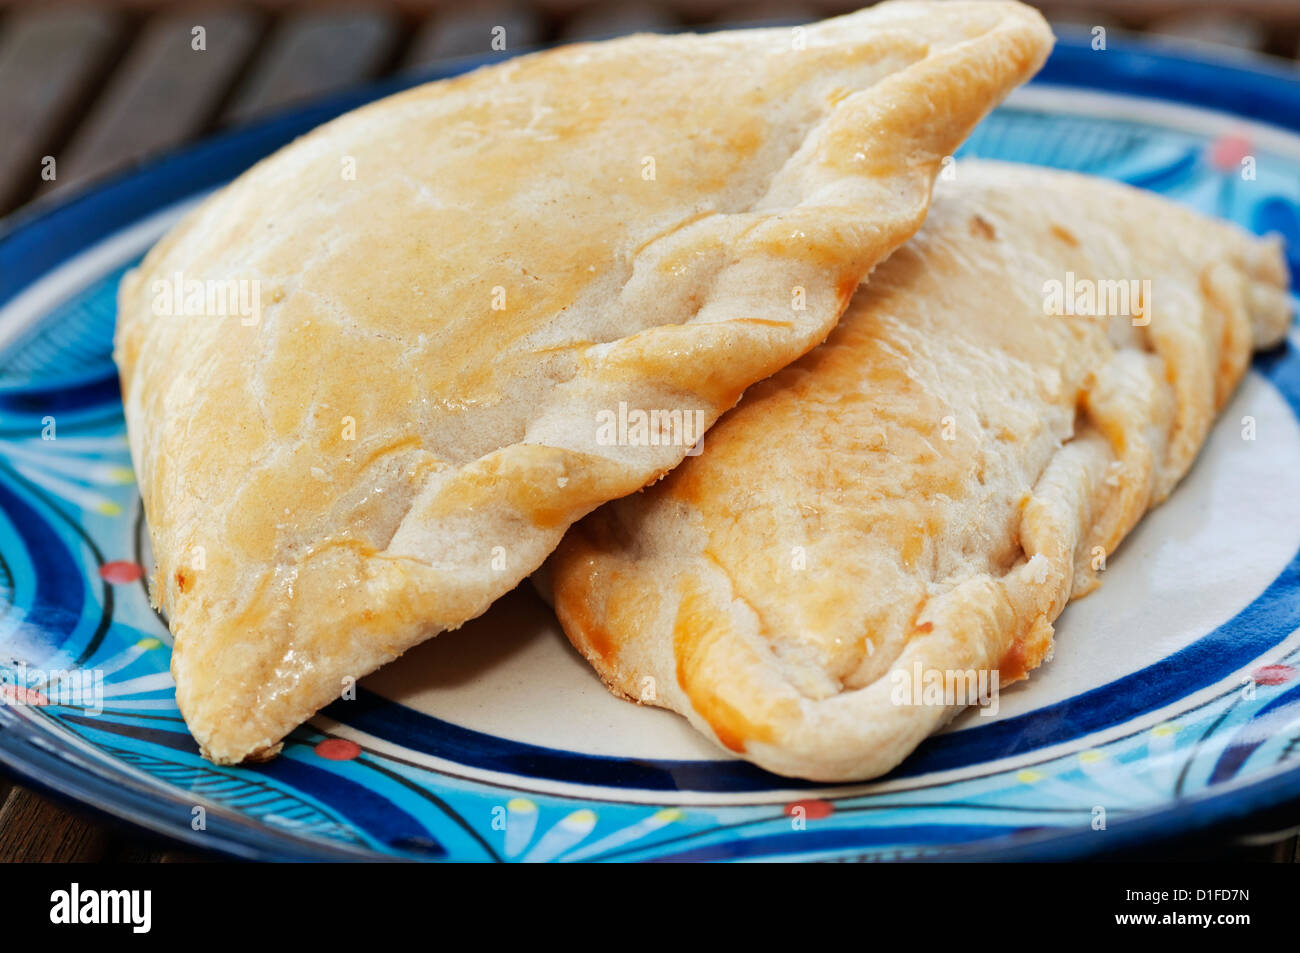 A plate is filled with two Mexican dessert empanada pastries. Stock Photo